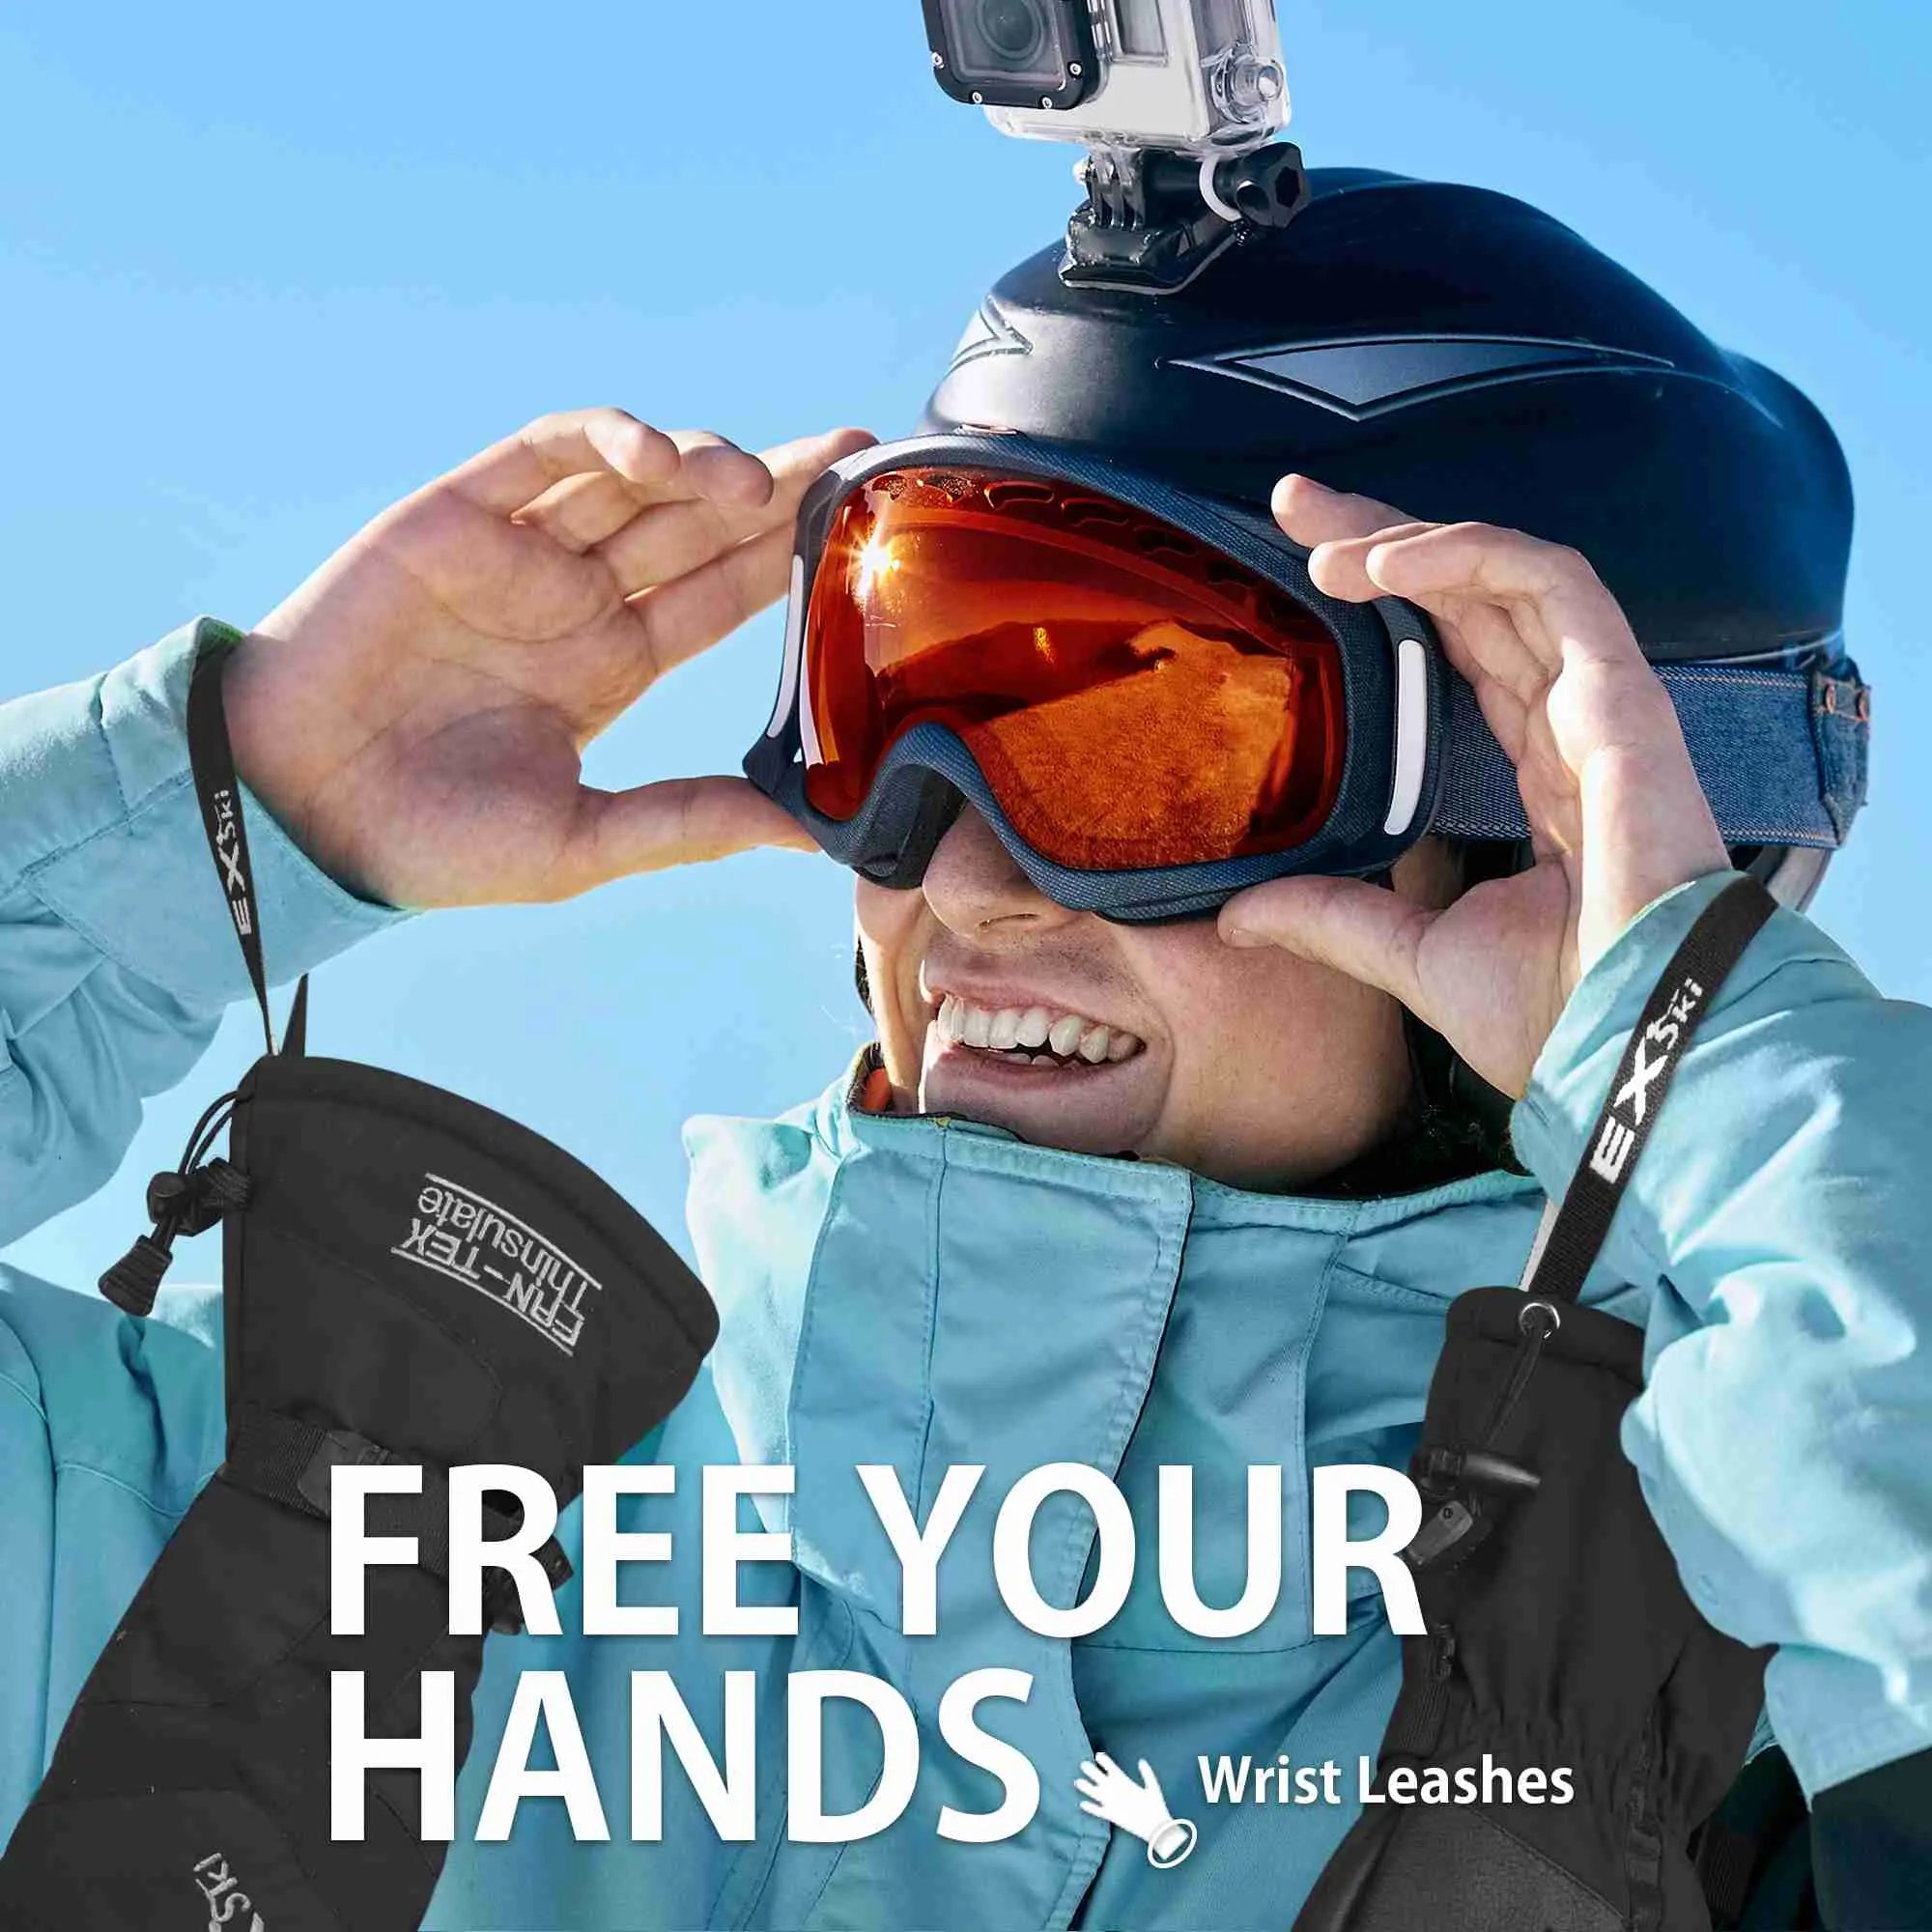 EXski Waterproof Ski Mittens - Thermal Gloves for Extreme Cold